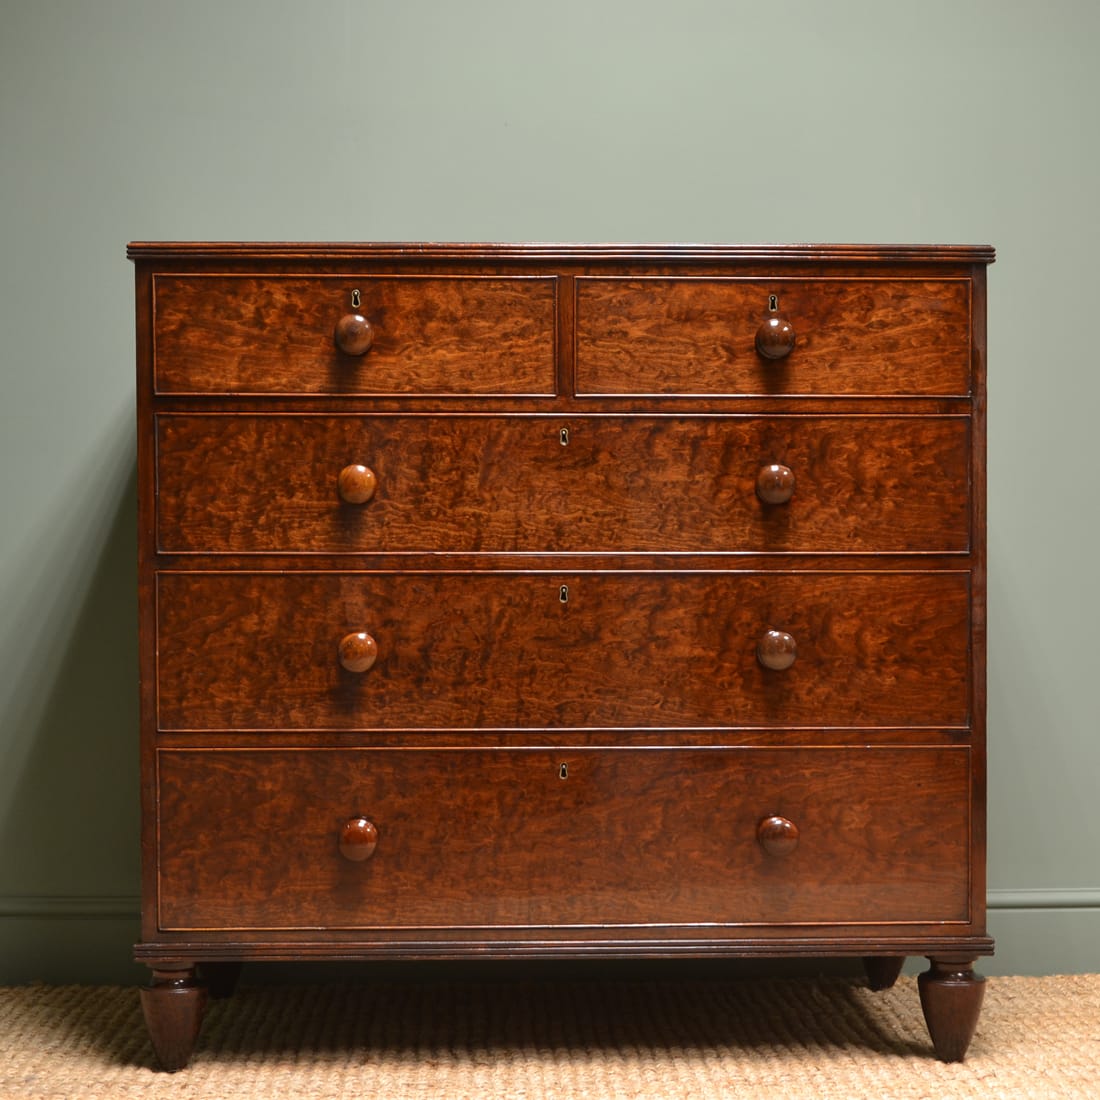 Spectacular Plum Pudding Mahogany Regency Antique Chest of Drawers